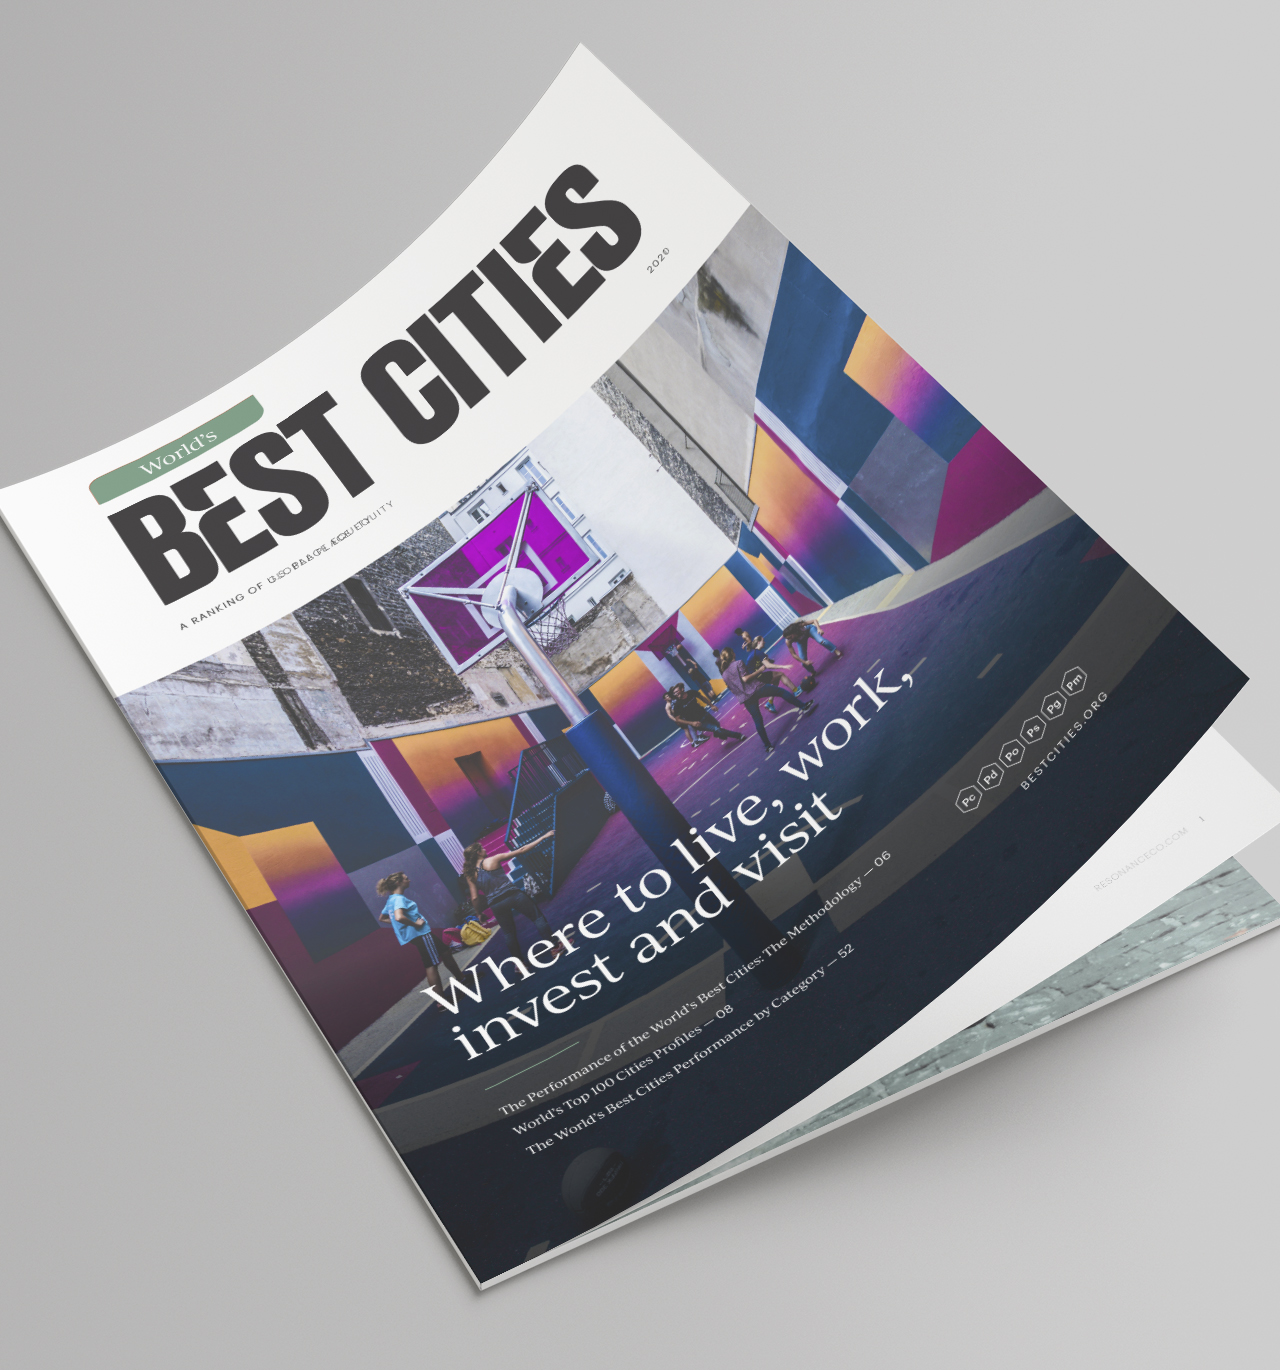 The 2021 World’s Best Cities Report, created by Resonance Consultancy, is the latest edition of the most comprehensive city ranking on the planet. 